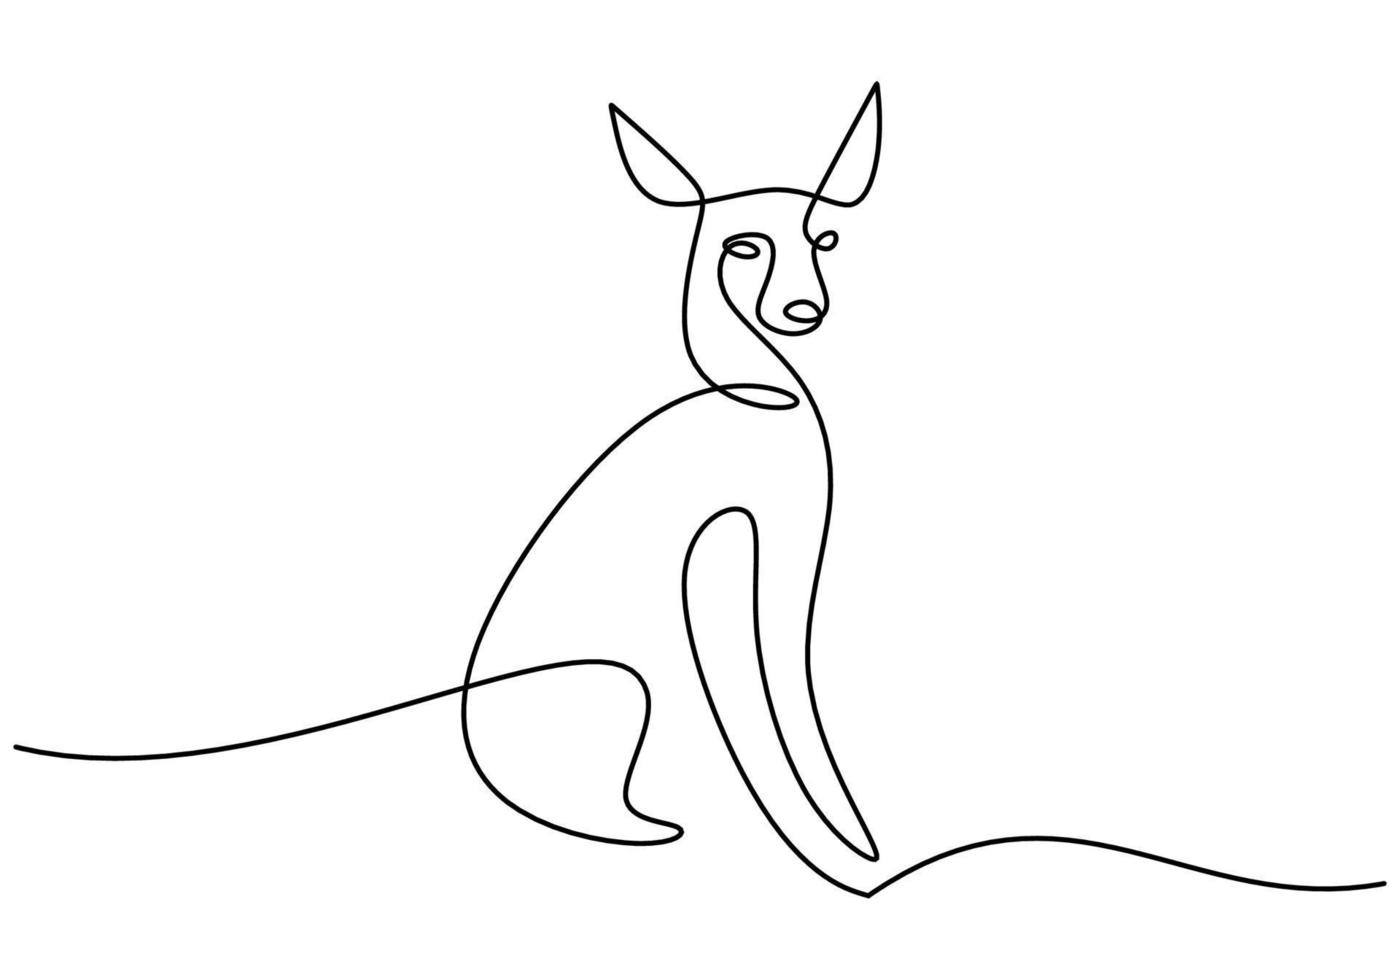 Hand drawn one single continuous line of dog on white background. vector